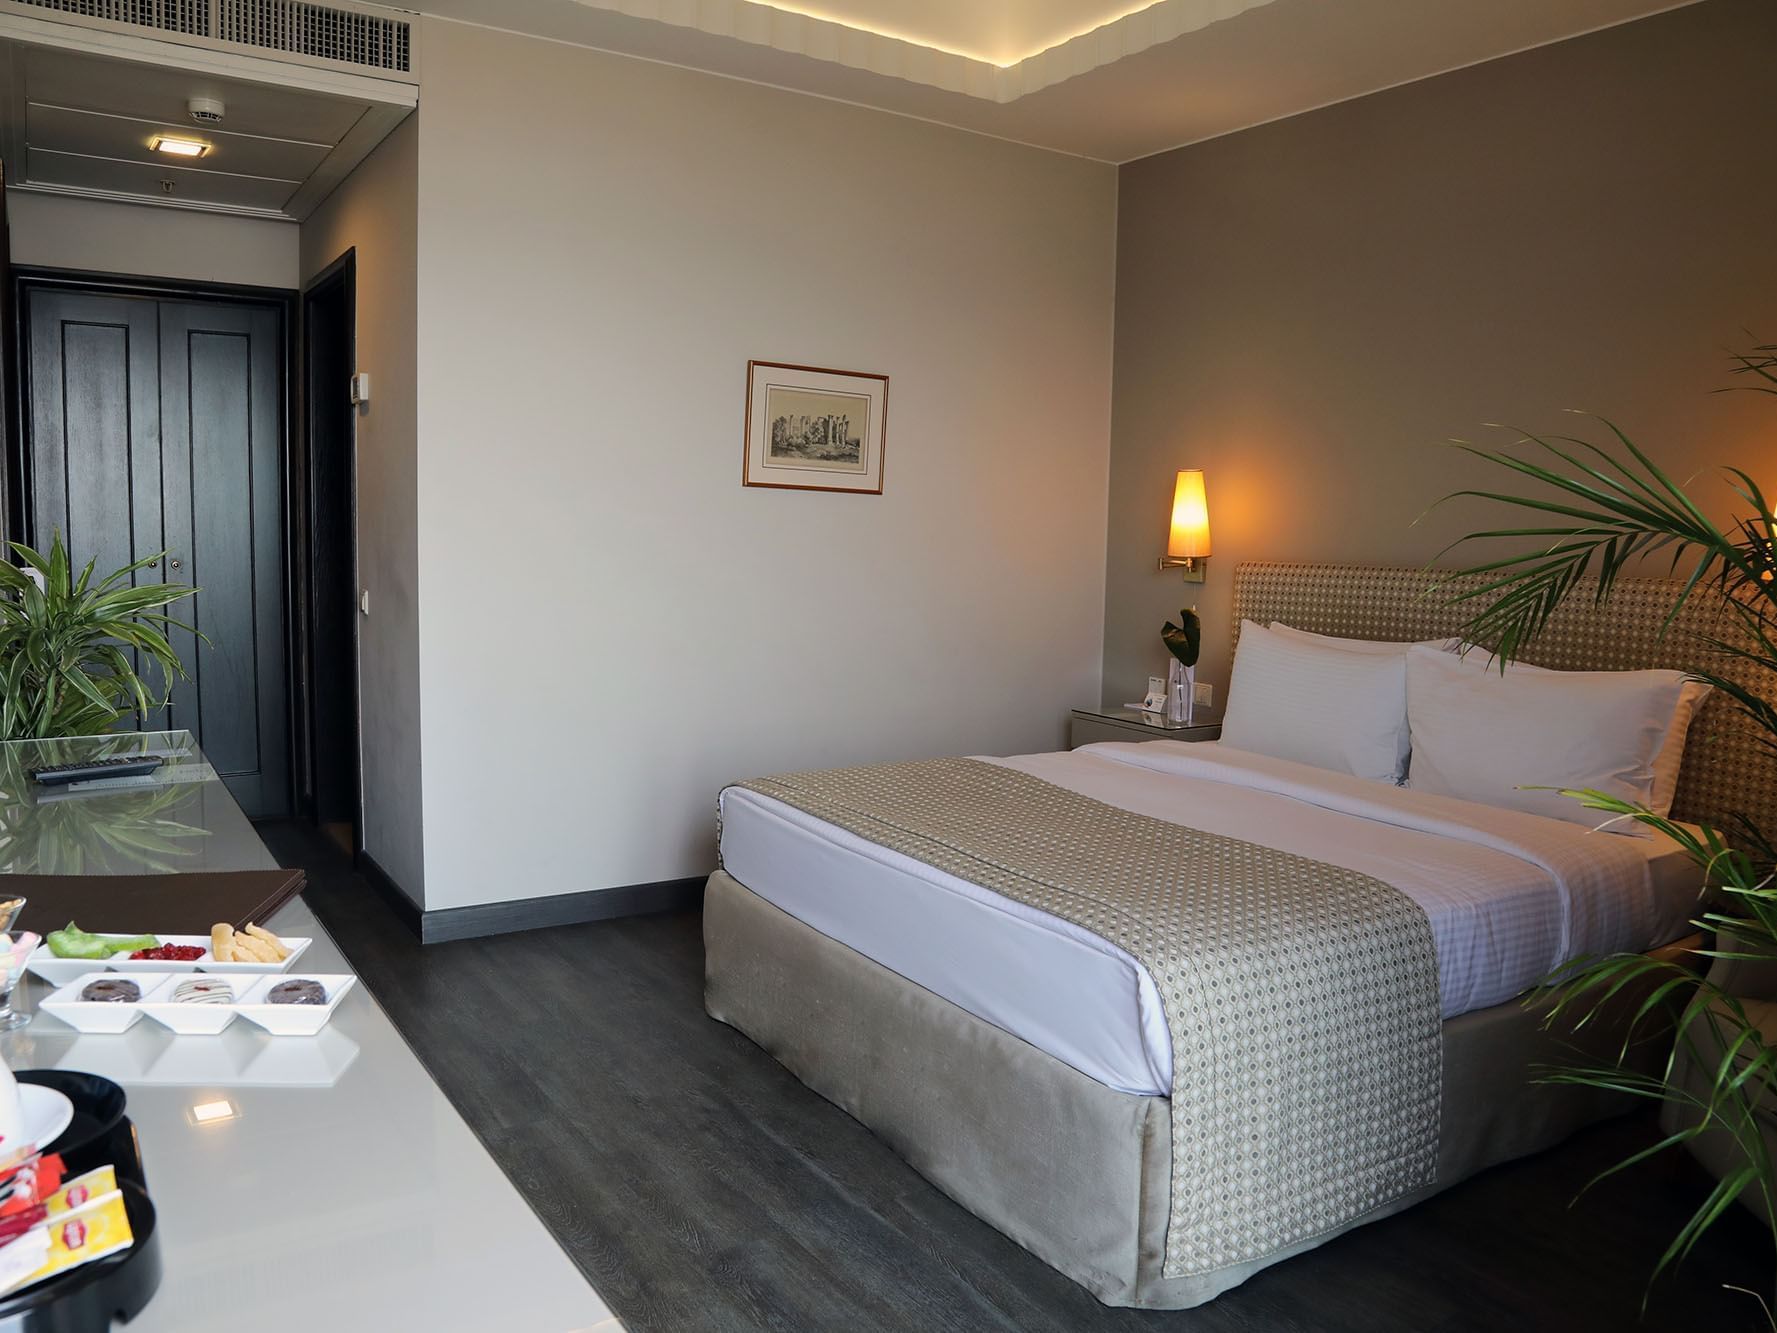 Premium Room with welcome amenity